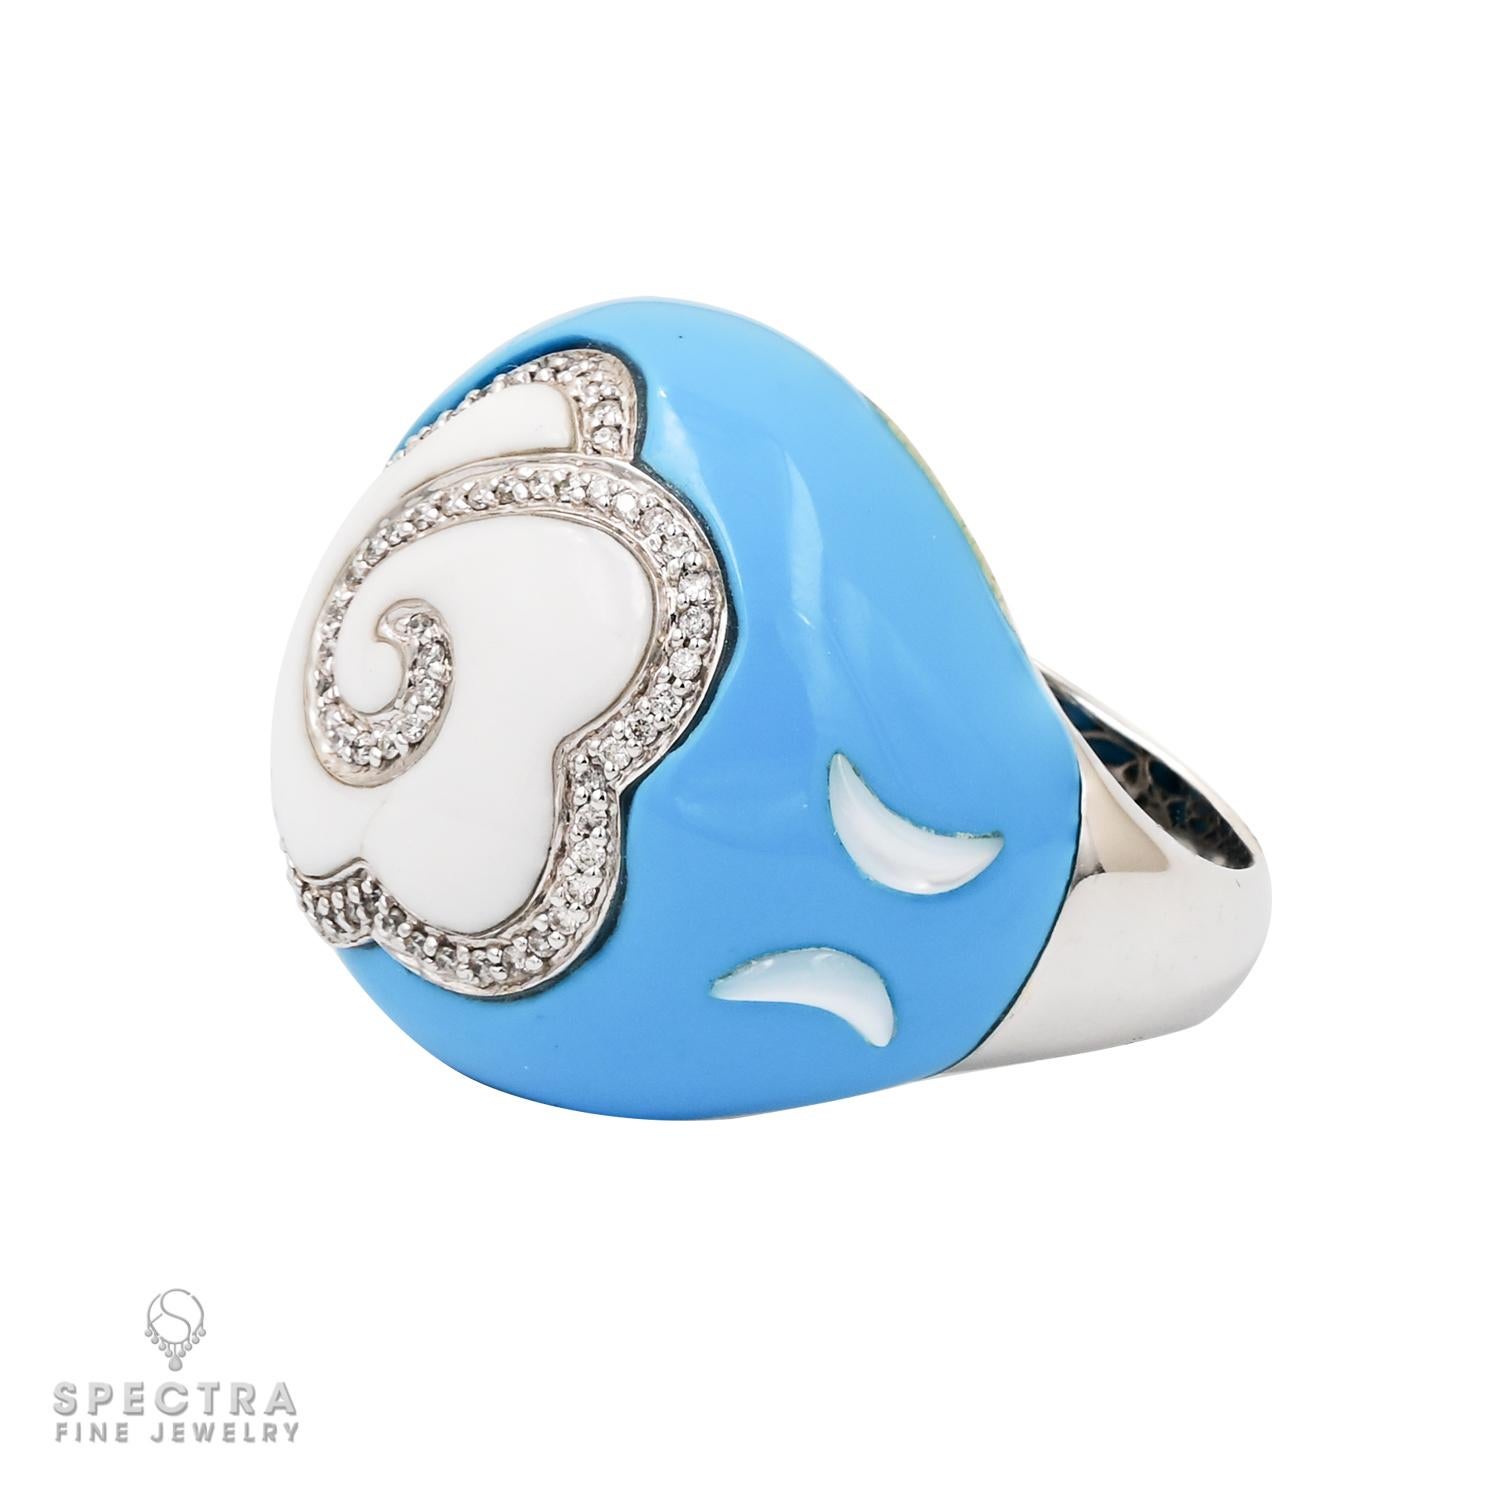 This lovely Enamel Diamond 'Dome' Ring, crafted in 18K white gold, showcases a captivating design. Adorned with a delightful sky blue enamel on its domed shape, the ring features a central white enamel cloud, intricately intersecting the blue with